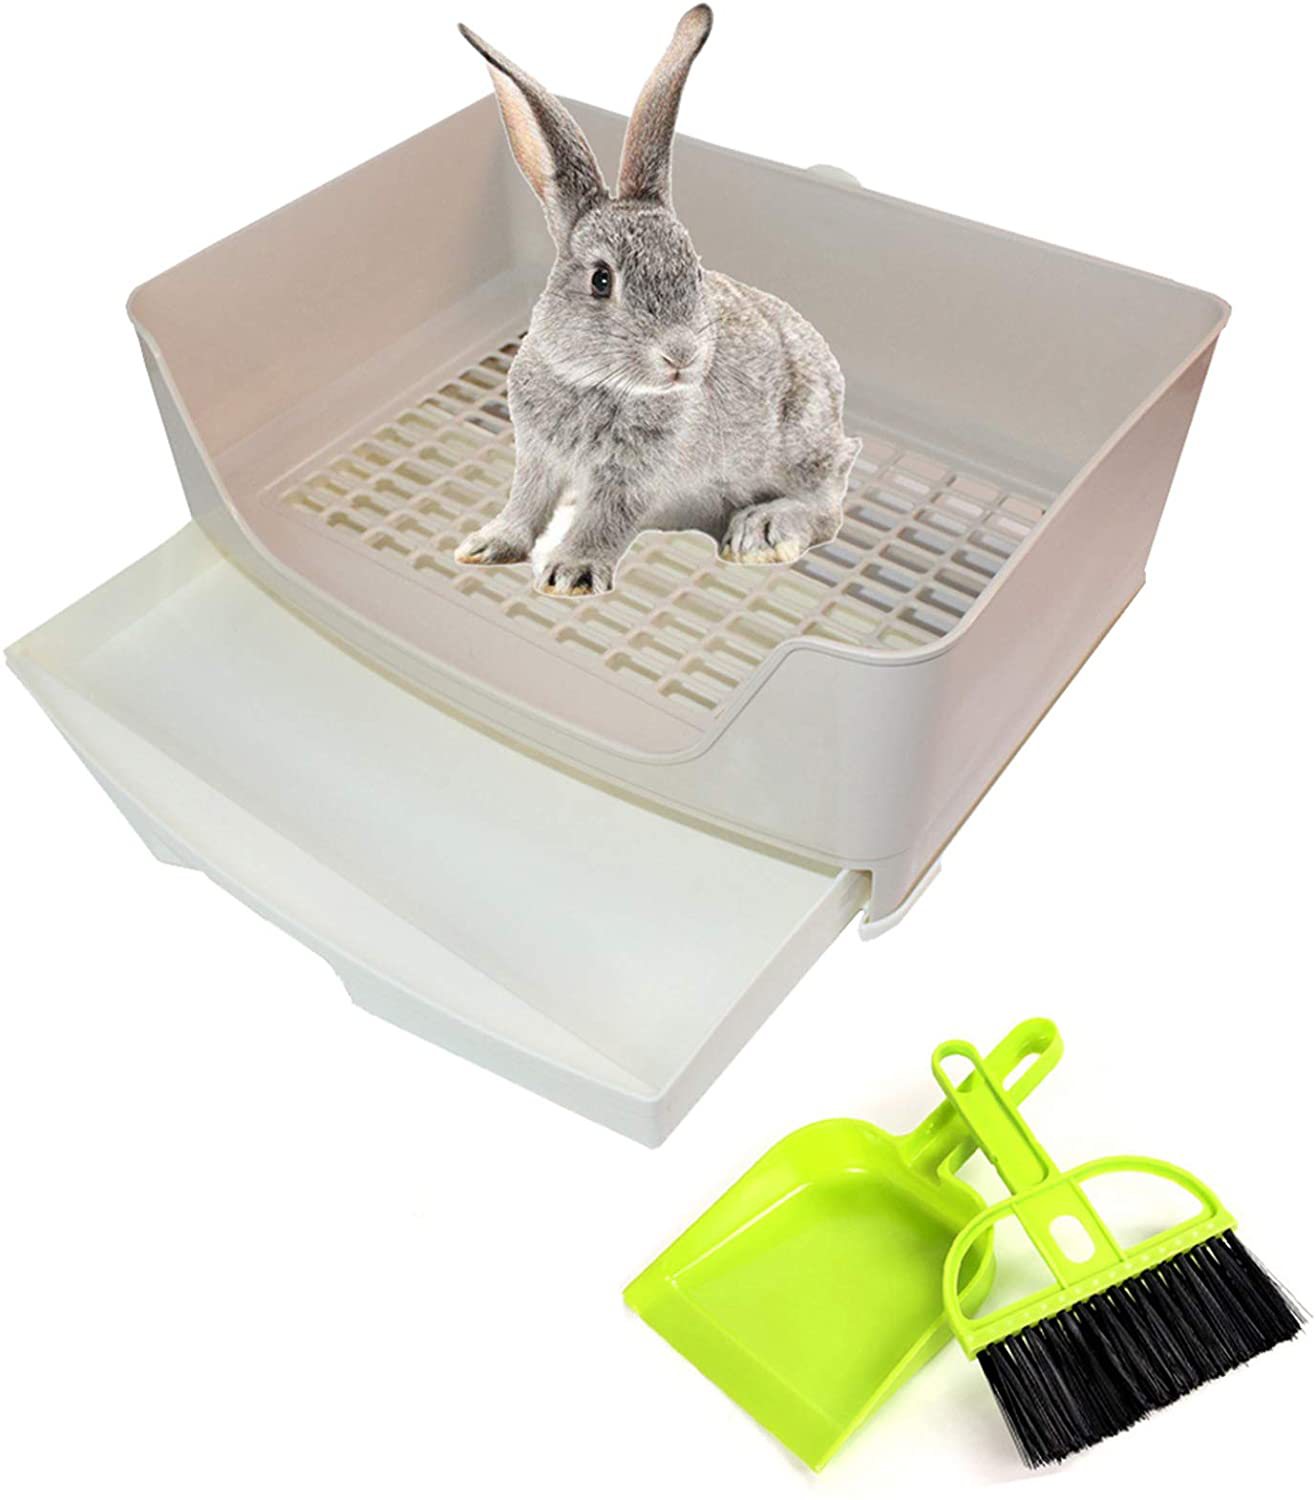 PINVNBY Large Rabbit Litter Box Bigger Pet Litter Pan Trainer with Drawer Corner Toilet Box for Adult Guinea Pigs Chinchilla Ferret Hedgehog Small Animals